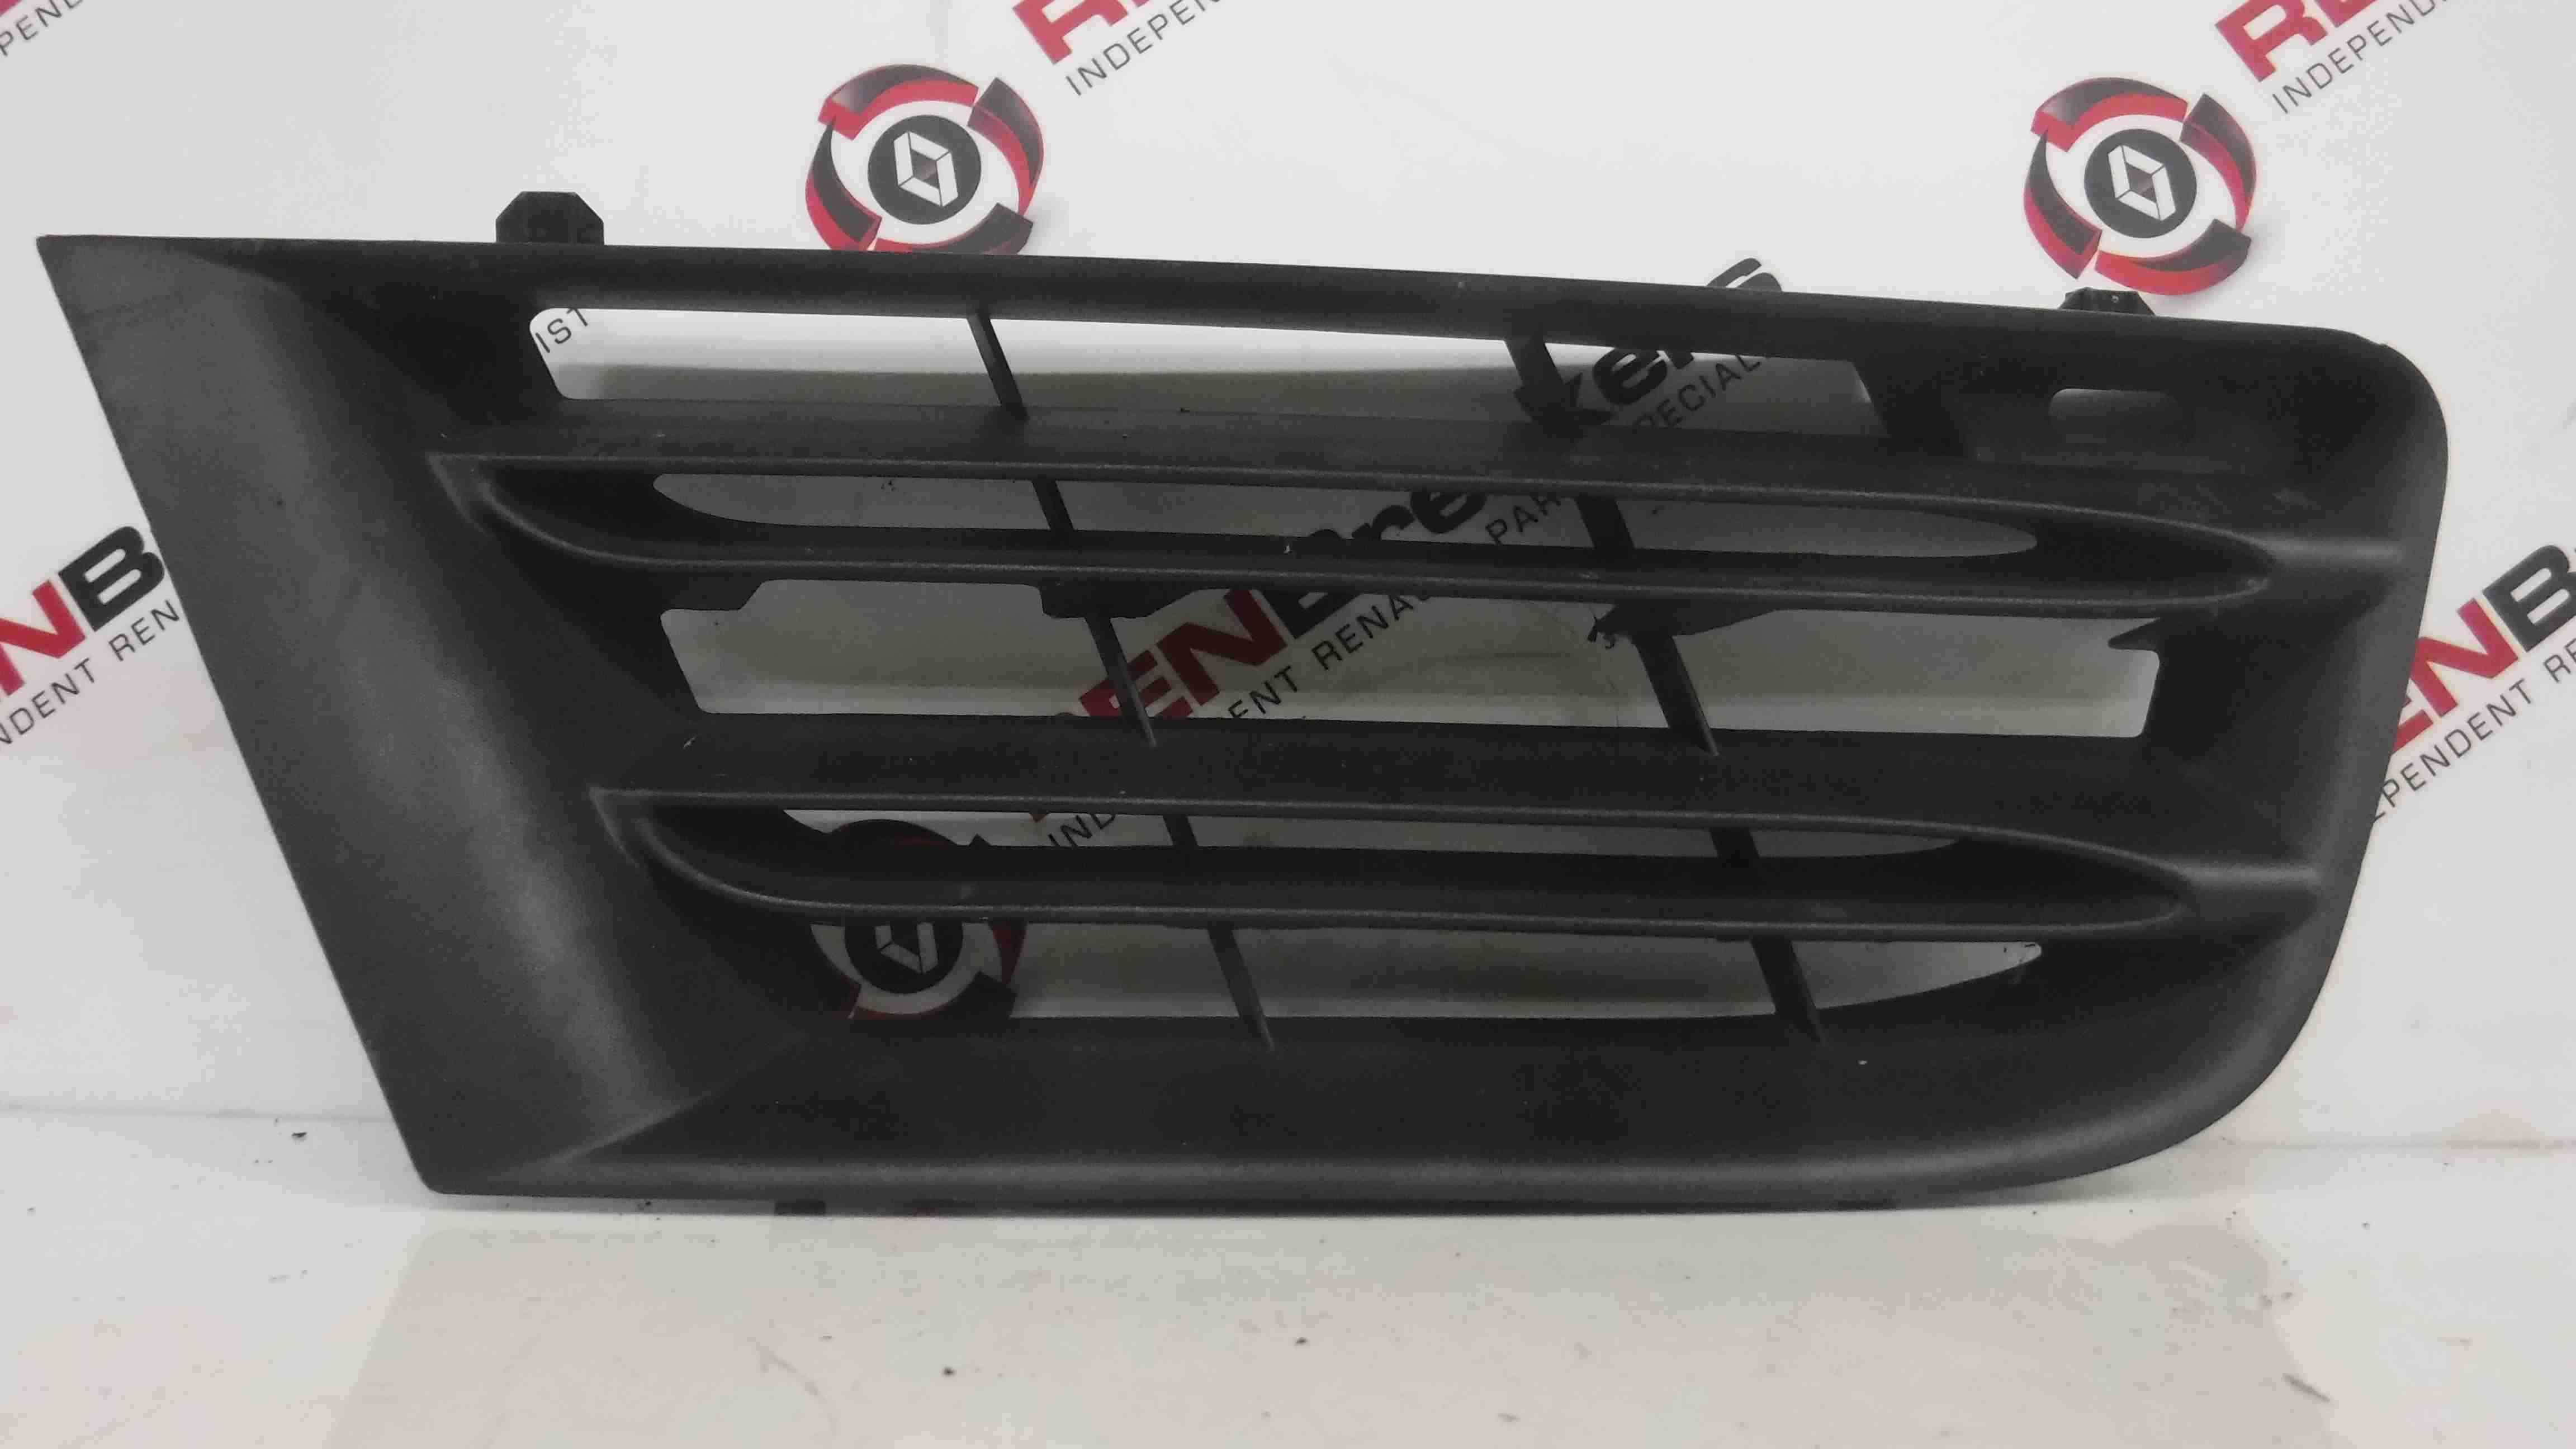 Renault Scenic 2006-2009 Drivers OSF Front Bumper Grill Grille Insert 1013577